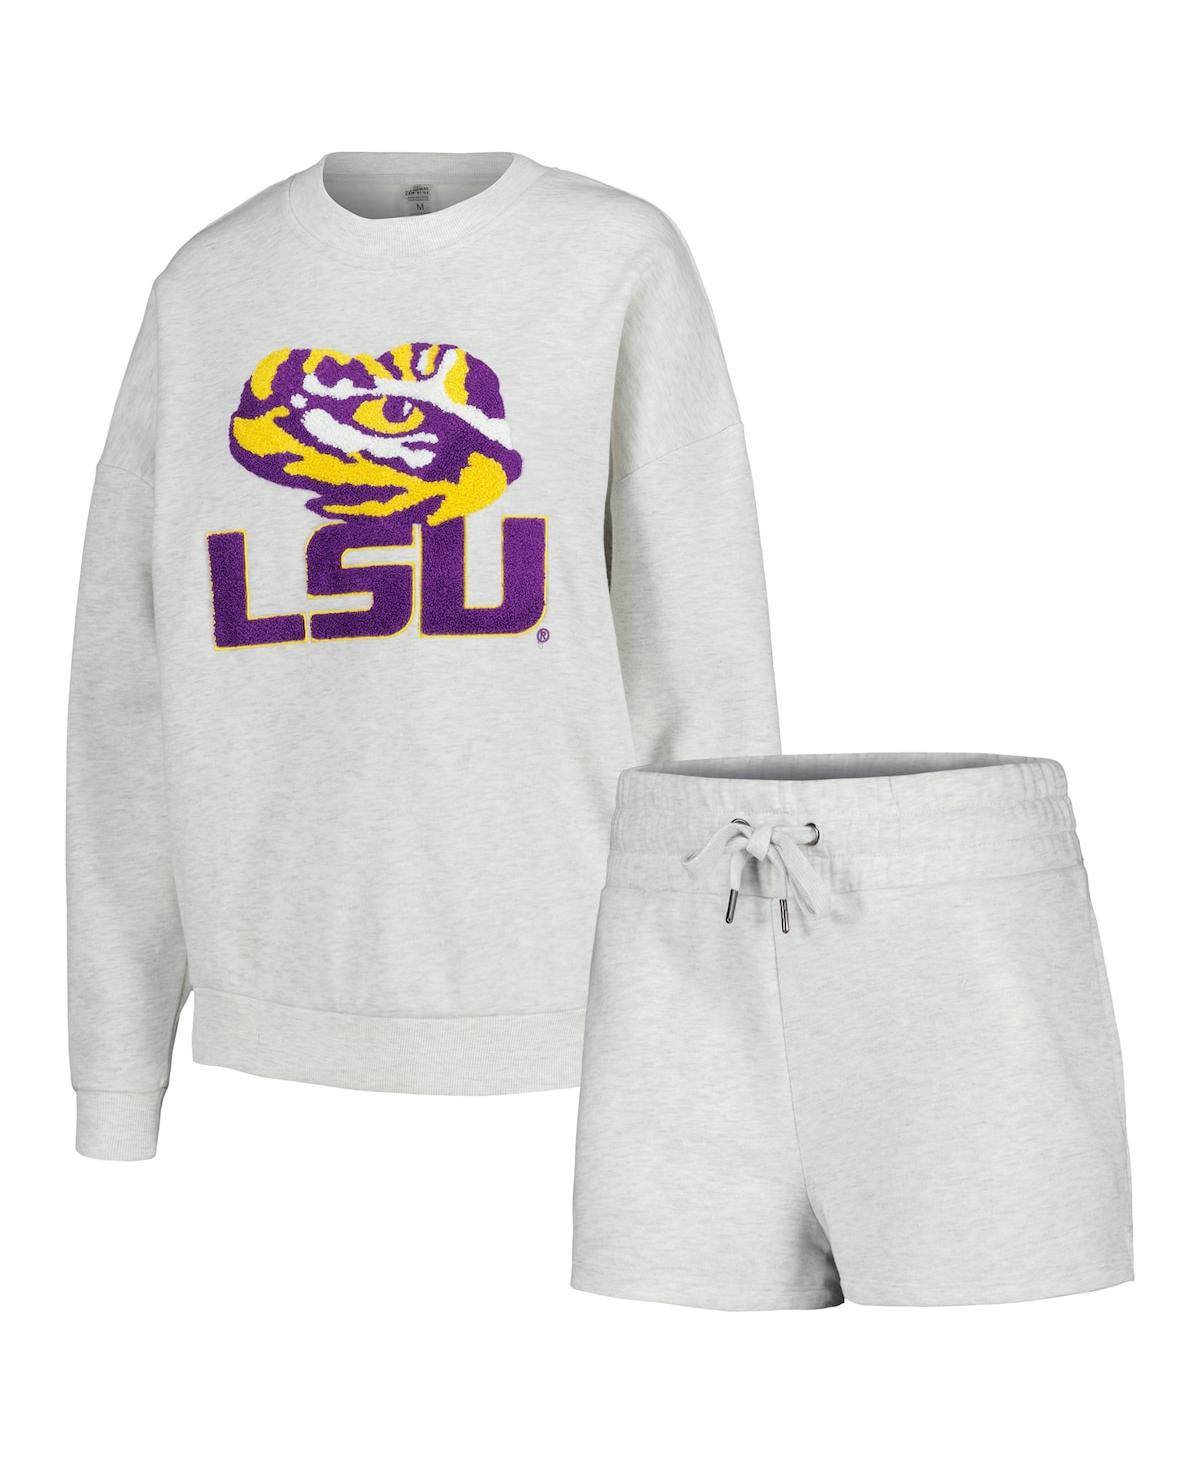 GAMEDAY COUTURE WOMEN'S GAMEDAY COUTURE ASH LSU TIGERS TEAM EFFORT PULLOVER SWEATSHIRT AND SHORTS SLEEP SET